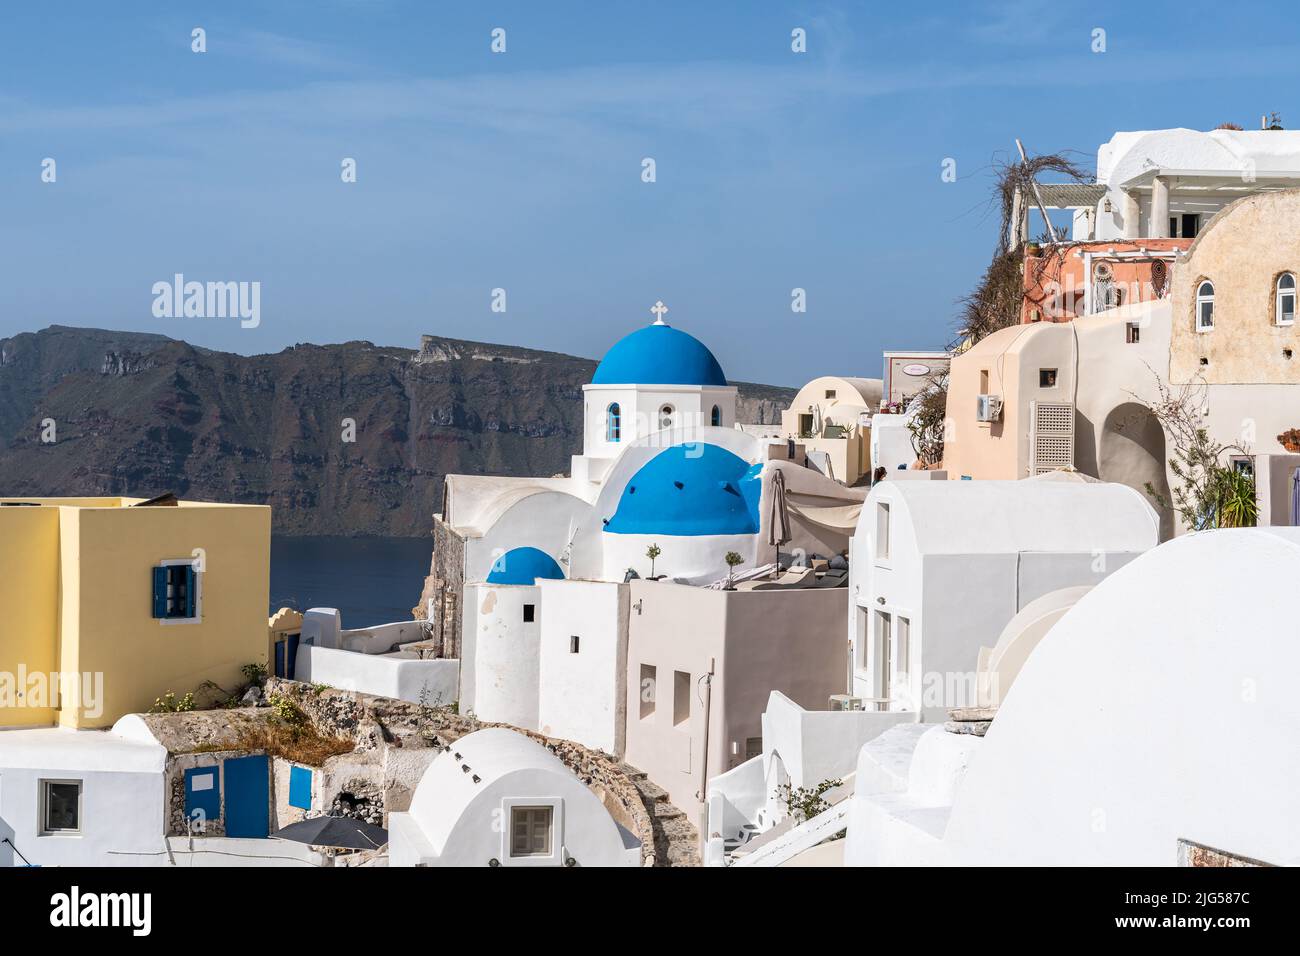 View of Oia village in Santorini with traditional white houses and blue domes churches, Greece Stock Photo